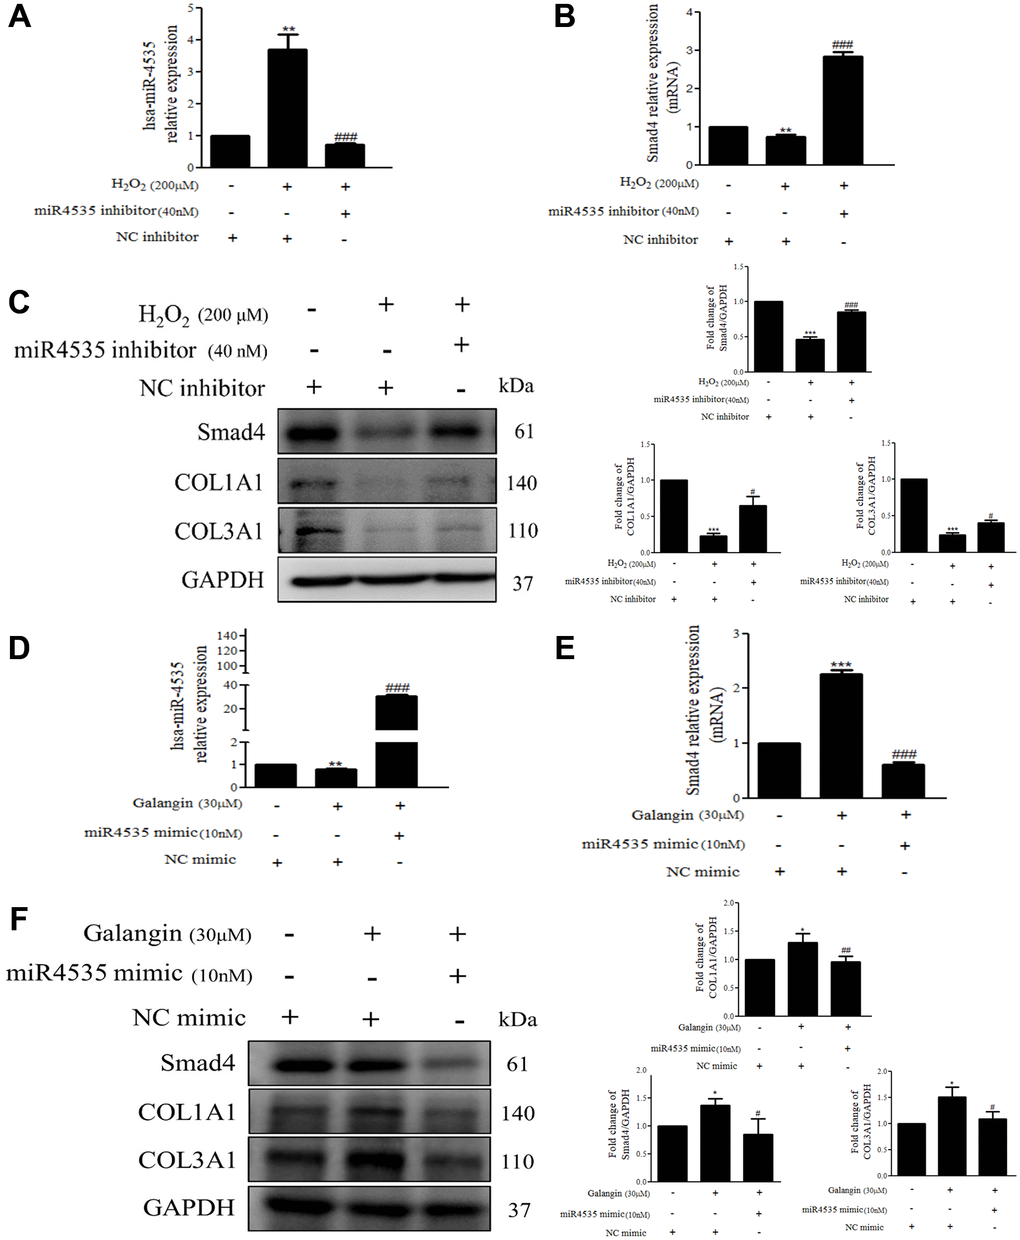 Overexpression or inhibition of hsa-miR-4535 regulates collagen synthesis in HS68 cells. (A–C) HS68 cells were transfected with hsa-miR-4535 inhibitor (40 nM) or inhibitor NC (40 nM) for 1 h and then cotreated with H2O2 (200 μM) for 23 h. (D–F) HS68 cells were transfected with hsa-miR-4535 mimic (10 nM) or mimic NC (10 nM) for 1 h and then co-treated with galangin (30 μM) for 23 h. hsa-miR-4535 levels were detected by qPCR to ensure successful transfection. Protein levels of Smad4, COL1A1, and COL3A1 were analyzed by western blotting. GAPDH was used as a loading control. Values are shown as mean ± SE. Quantification of the results is shown (n = 3) *P **P ***P #P ##P ###P 2O2 or galangin-treated cells.